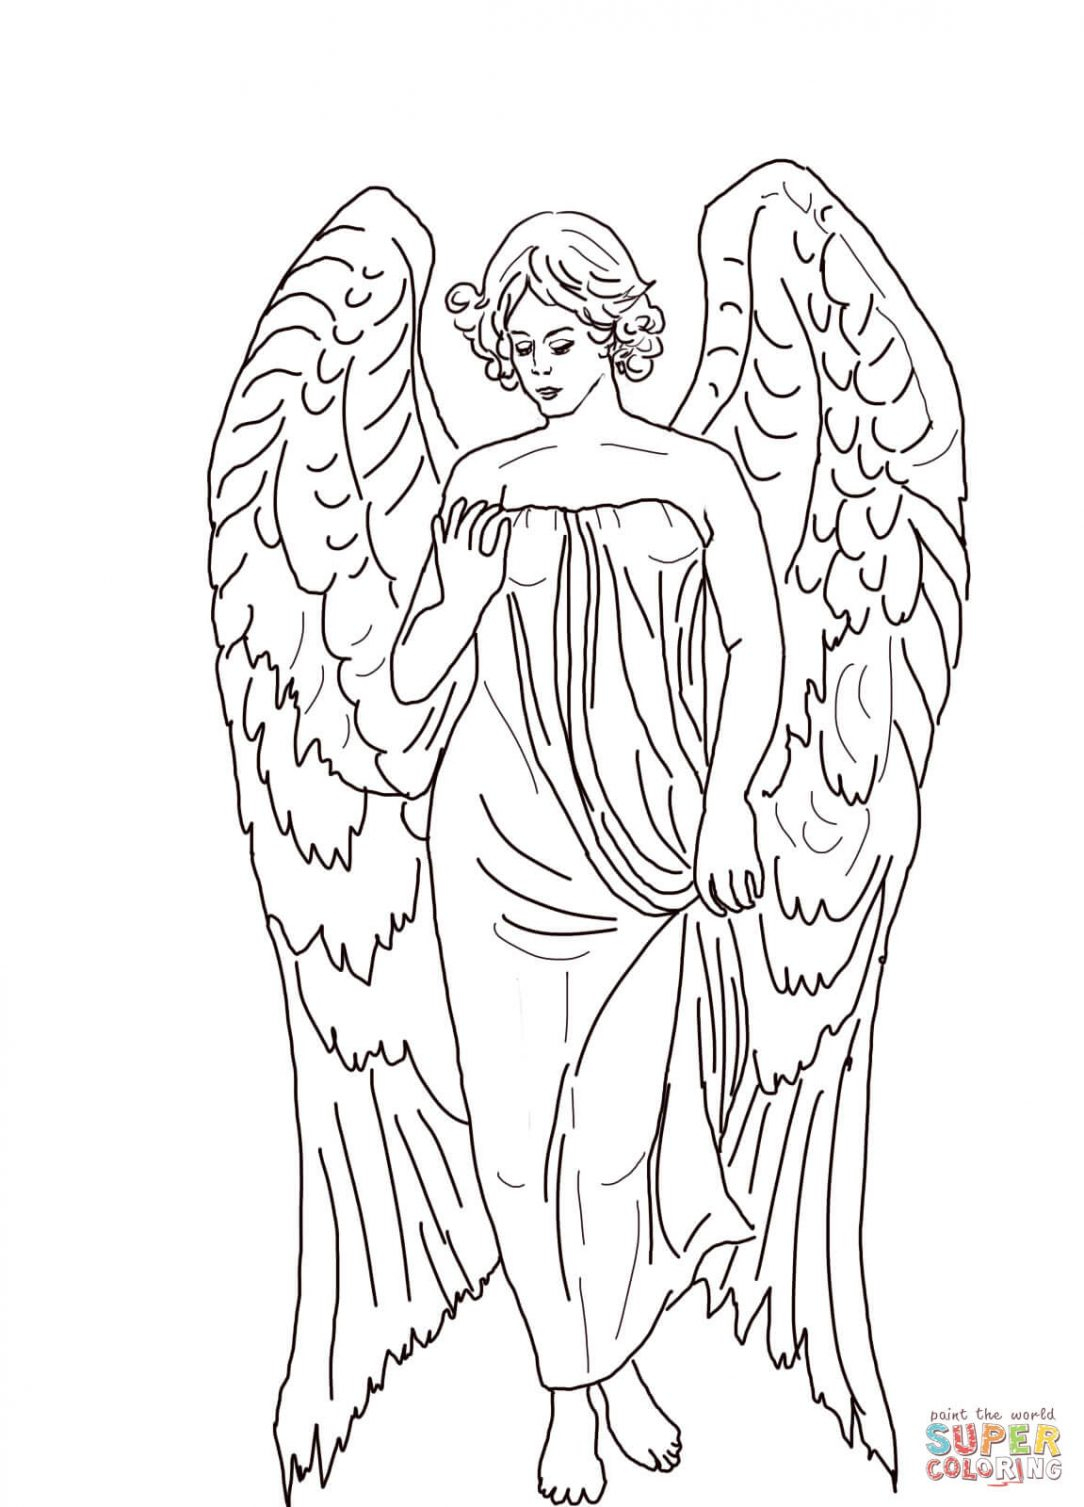 Angel Visits Joseph Coloring Page Angel Visits Mary Coloring Sheet Free Mandalas Pages For Adults